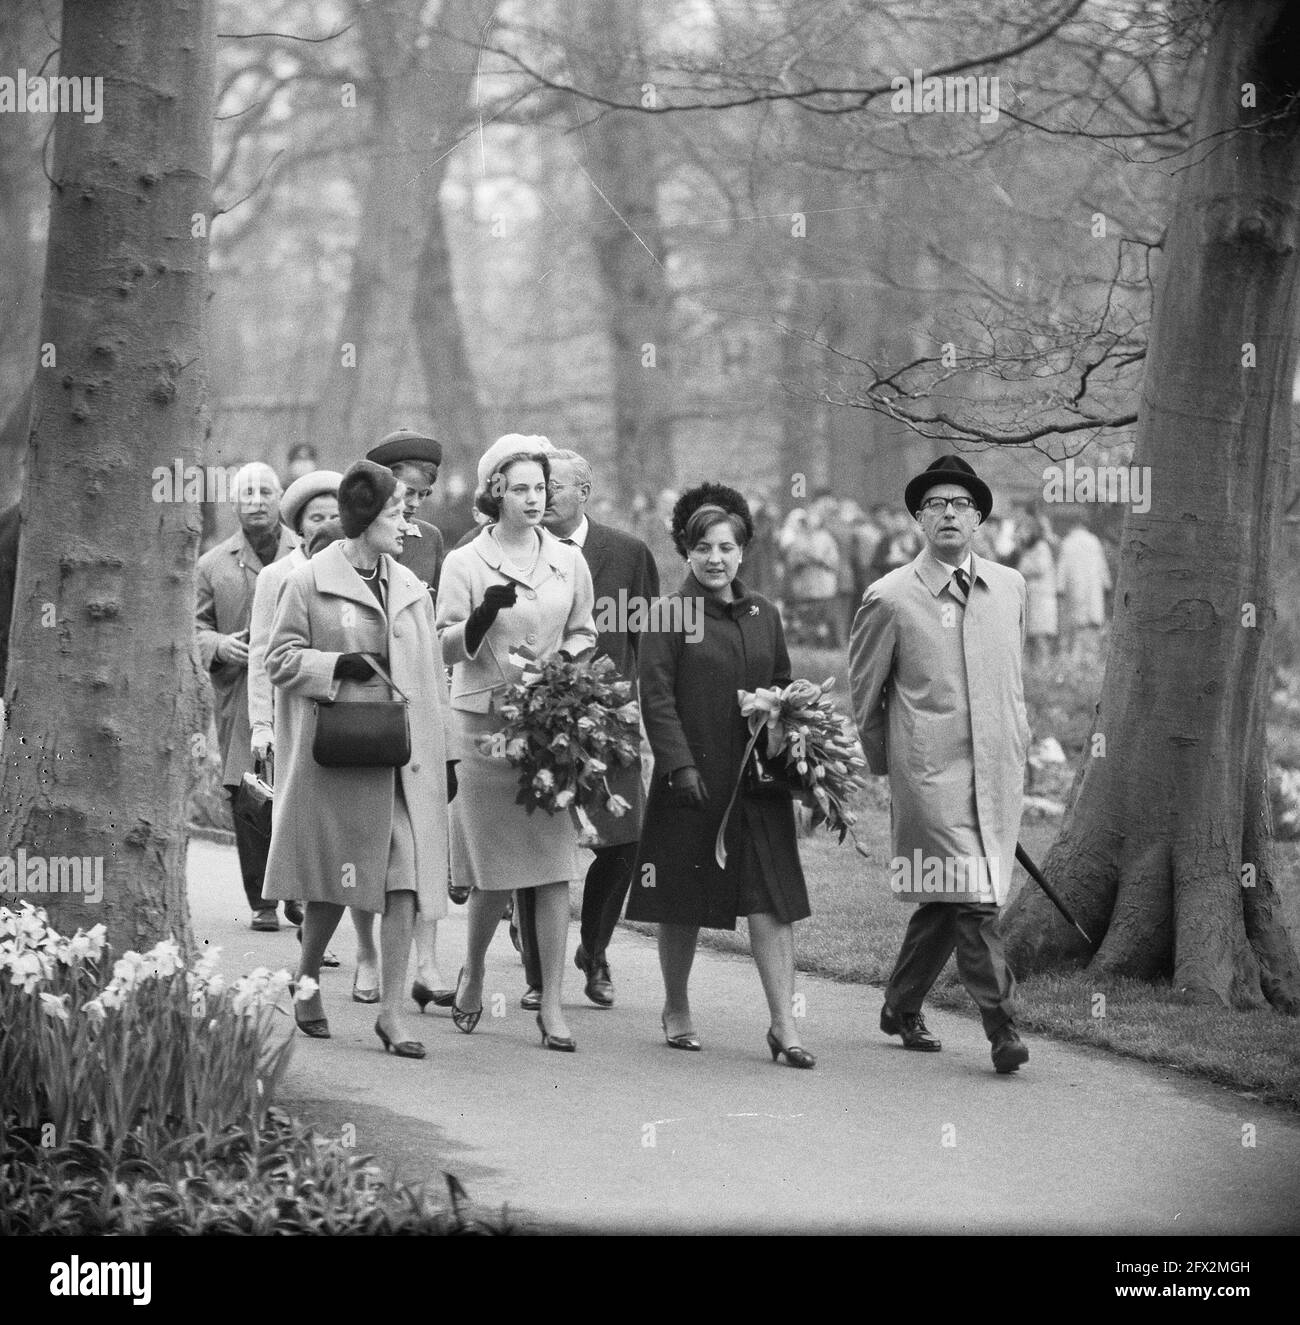 Princess Benedikte and Princess Margriet visit Keukenhof in Lisse, April 8, 1965, visits, The Netherlands, 20th century press agency photo, news to remember, documentary, historic photography 1945-1990, visual stories, human history of the Twentieth Century, capturing moments in time Stock Photo